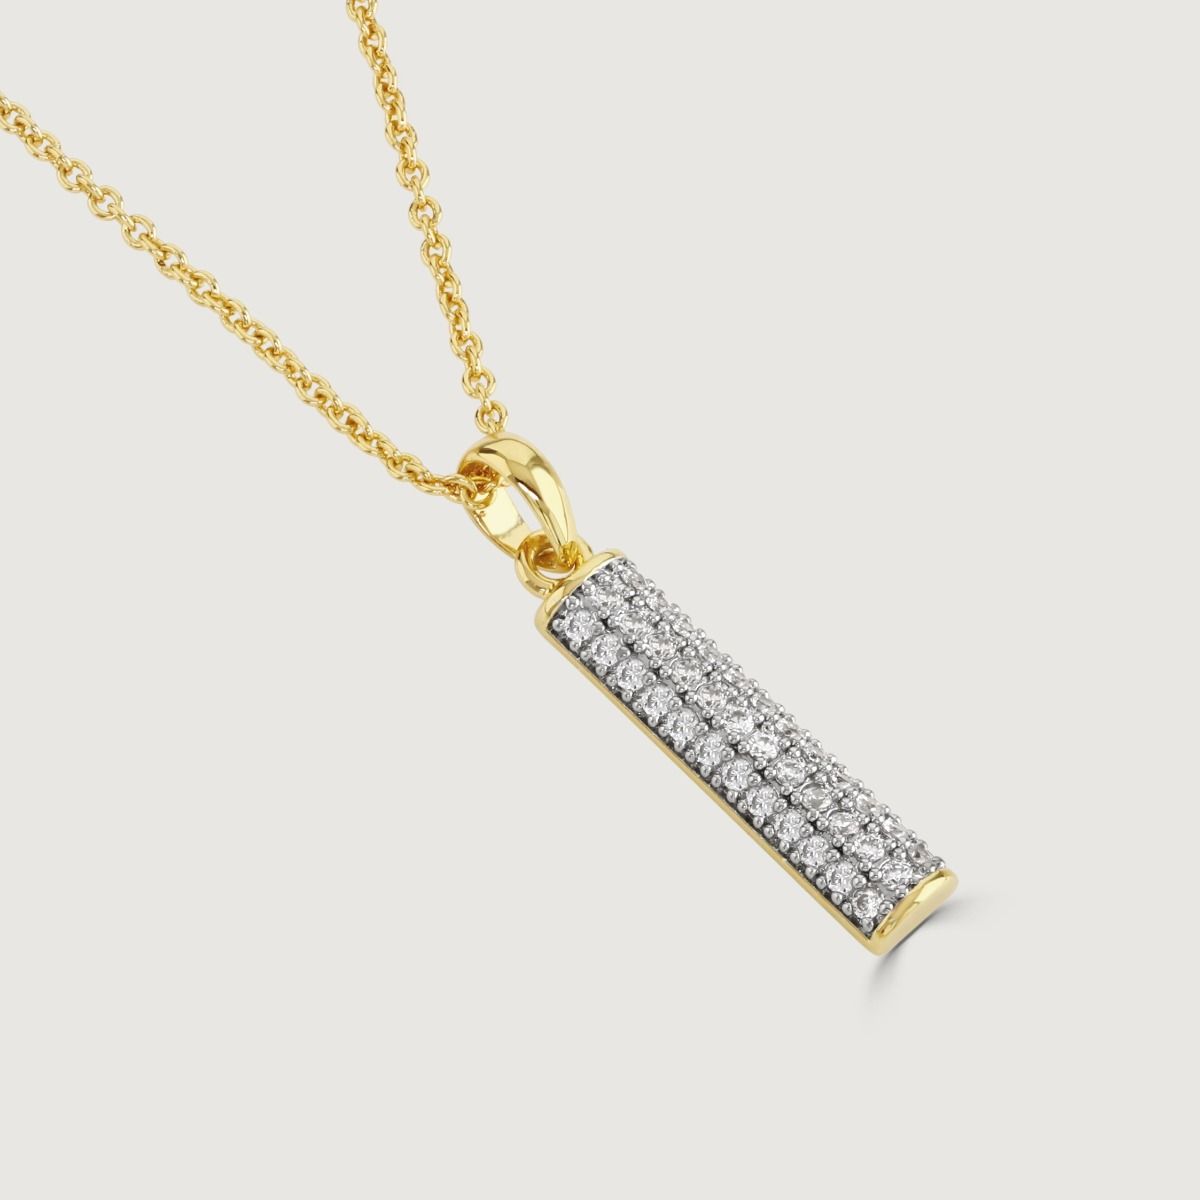 Elevate your elegance with the Pave Bar Necklace. Adorned with cubic zirconia, this necklace adds a touch of luxury to any ensemble. Its exquisite design and meticulous craftsmanship make it a must-have accessory for those who appreciate refined beauty.